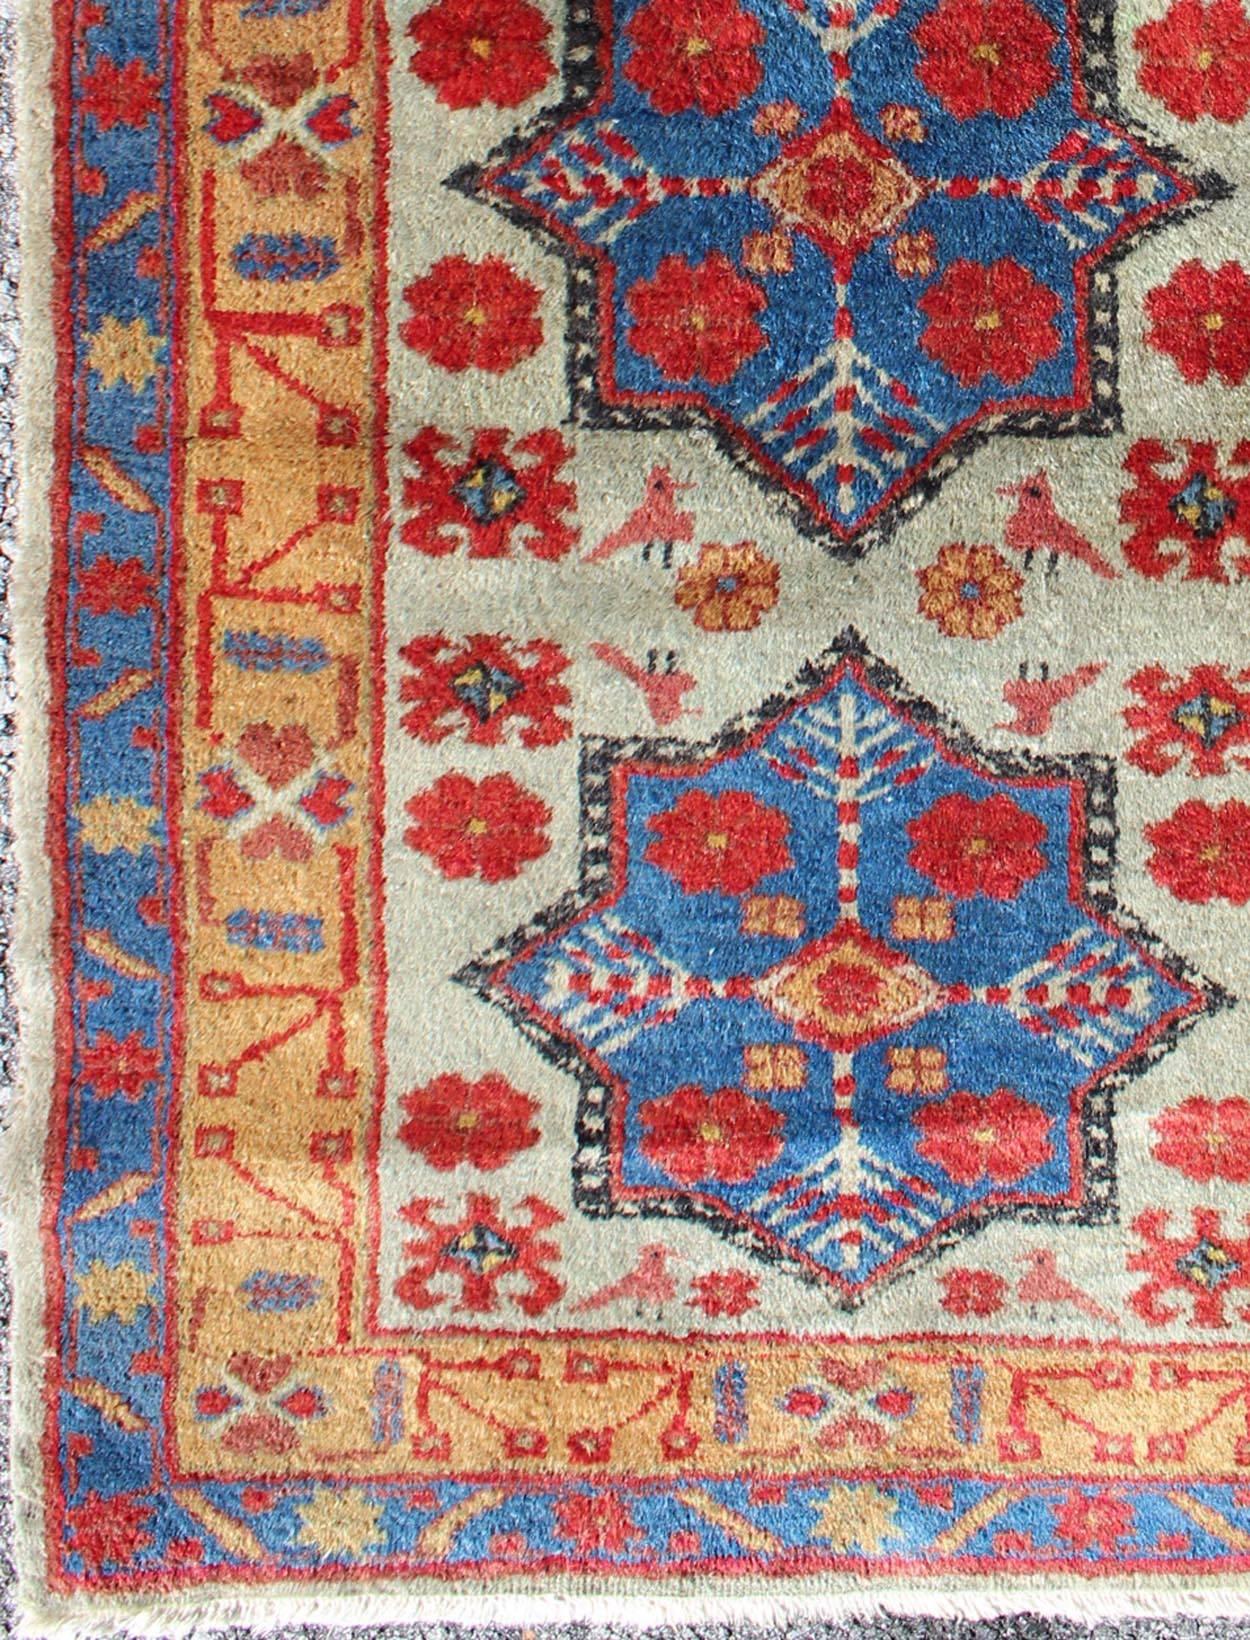 Vintage hand-knotted Turkish rug with fine wool and in excellent condition, Keivan Woven Arts rug tu-mev-3350, country of origin / type: Turkey / Oushak, circa mid-20th century

Measures: 2.4 x 4.5

 This colorful vintage Turkish carpet from the mid